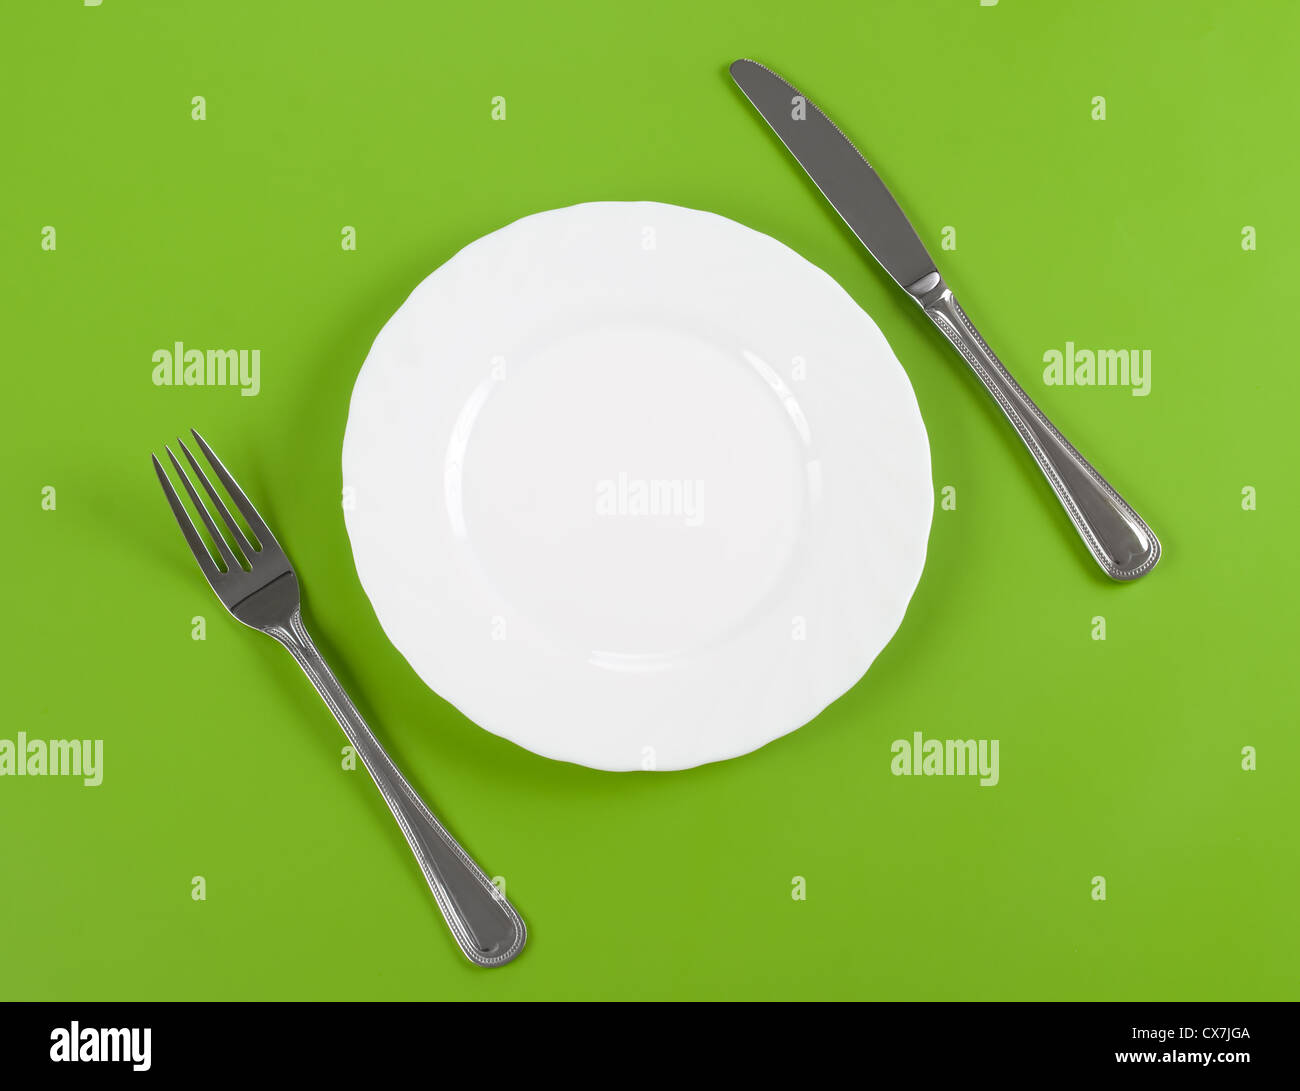 Knife, white round plate and fork on green background Stock Photo